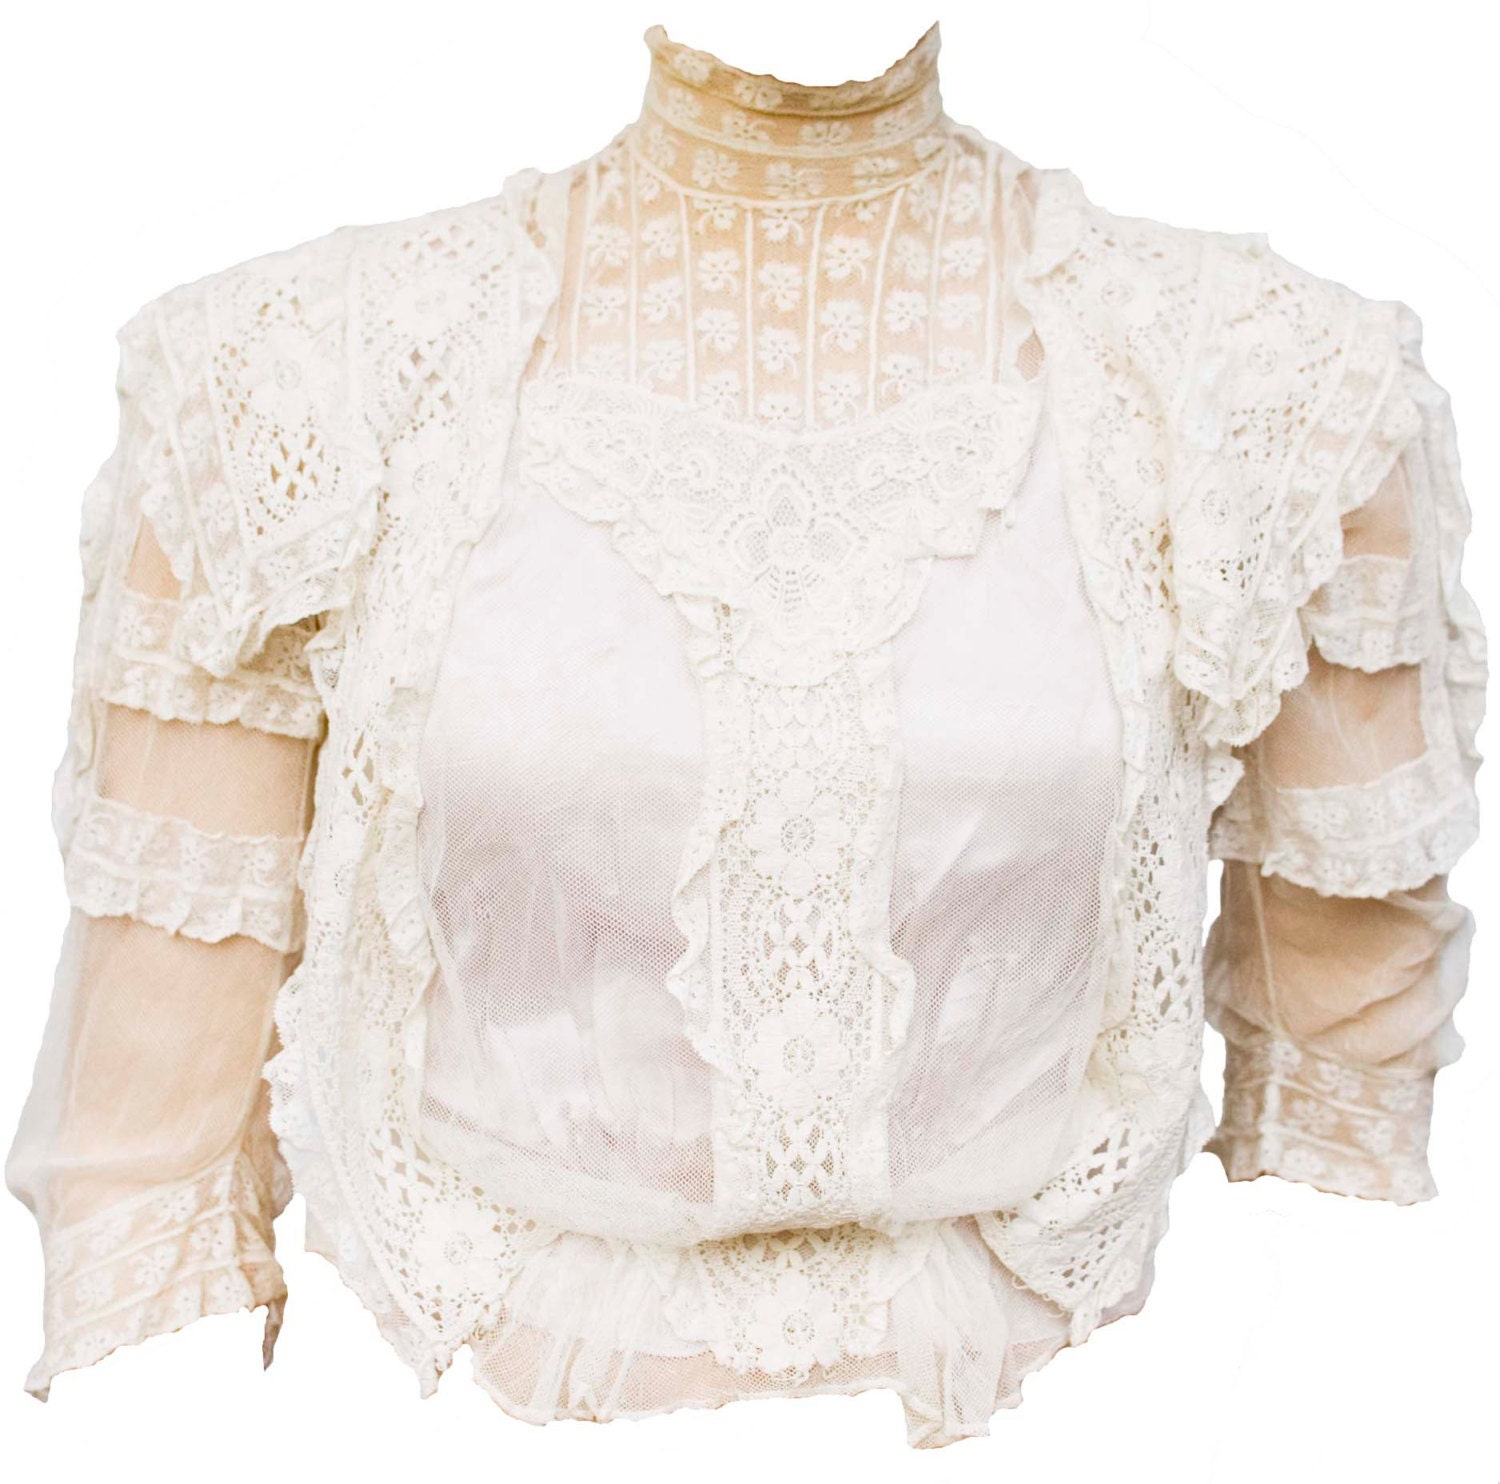 1900s Large Blouse Victorian White Lace Cotton by TopangaHiddenT